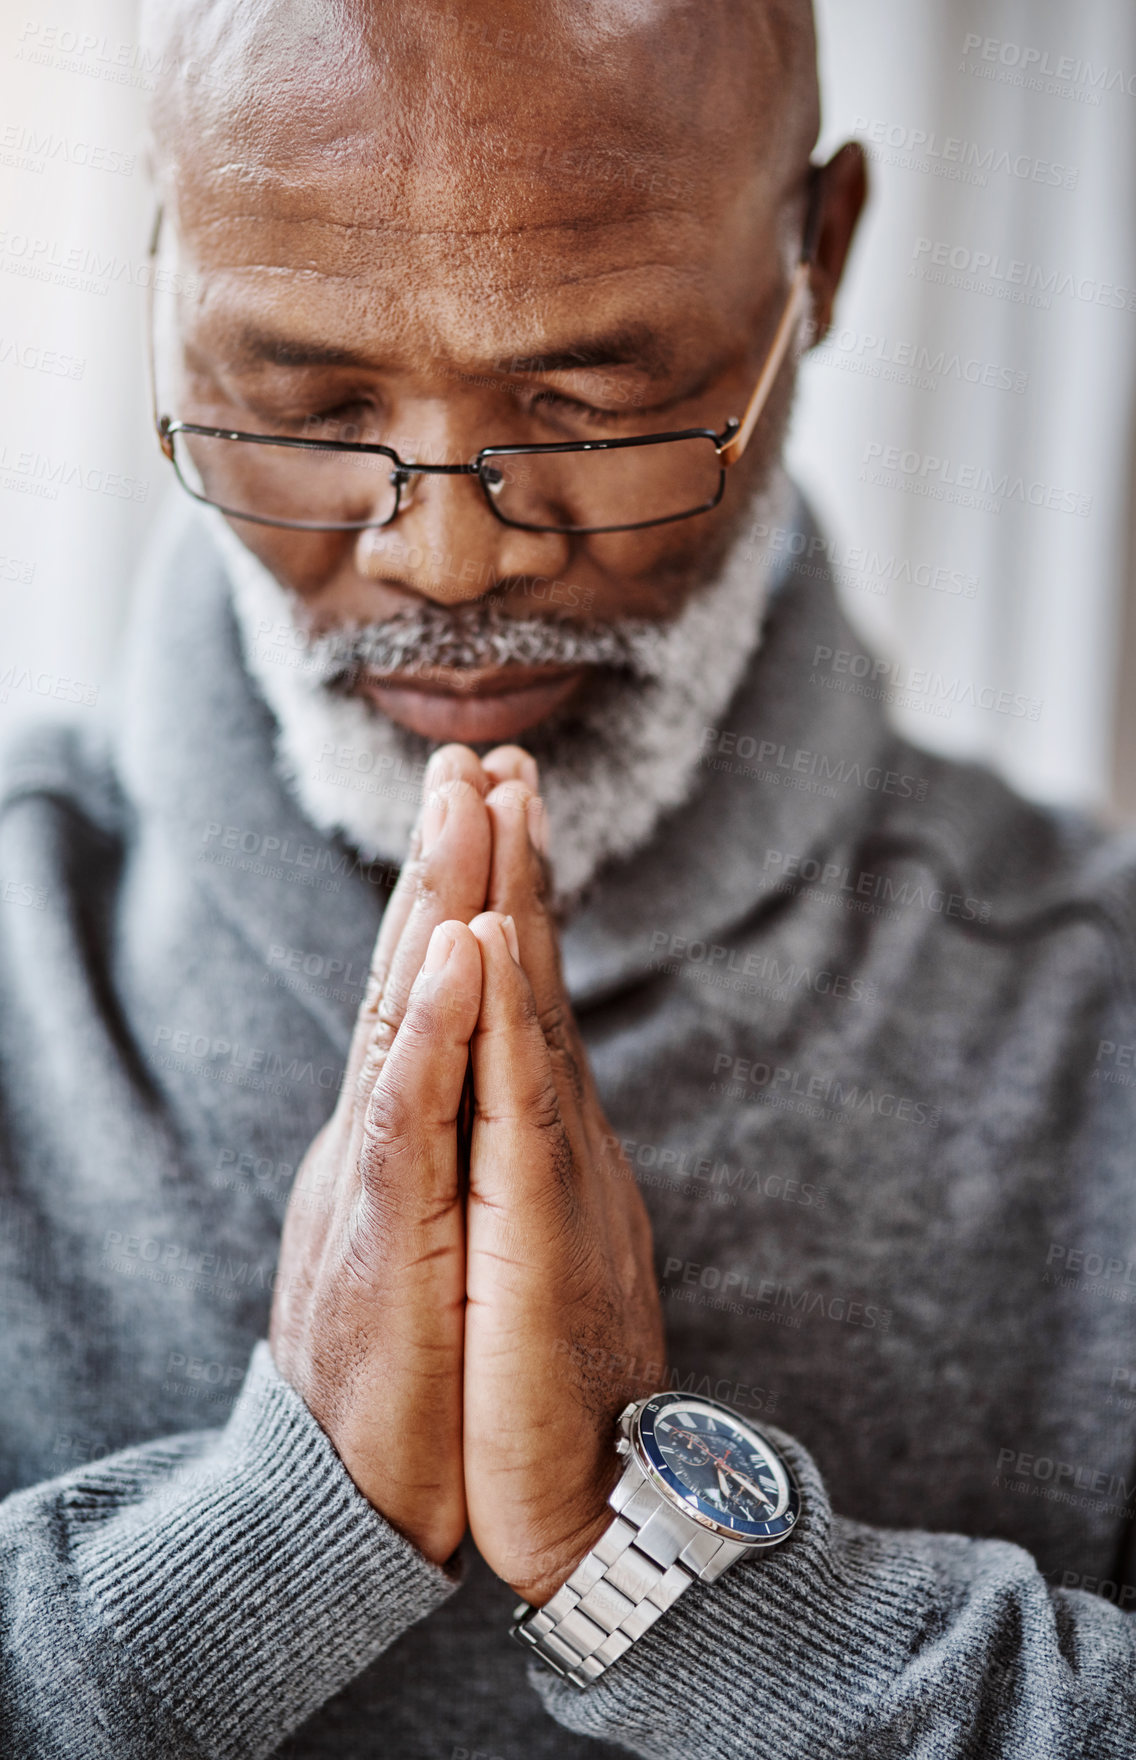 Buy stock photo Shot of a handsome senior man praying in his home